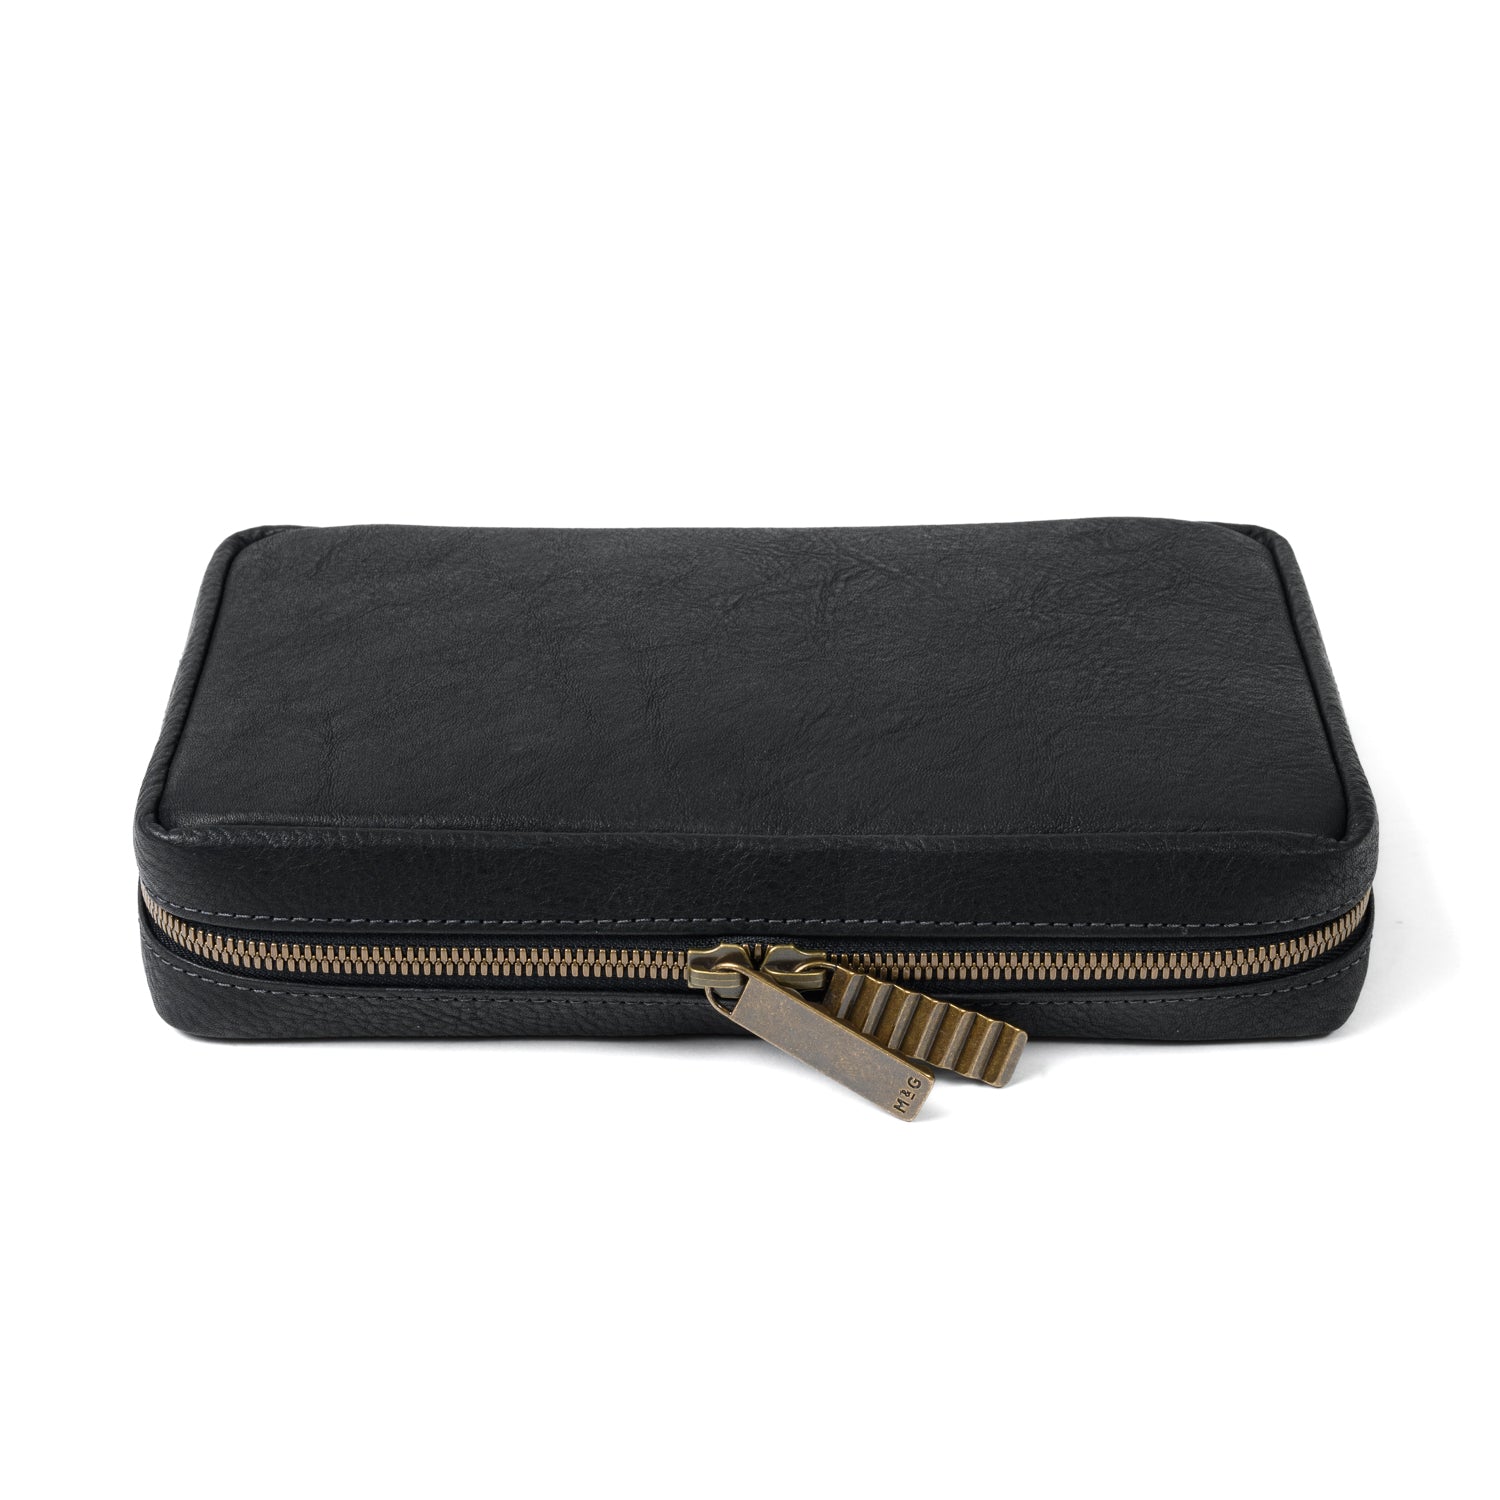 Kent Travel Kit in Seven Hills Black by Moore & Giles